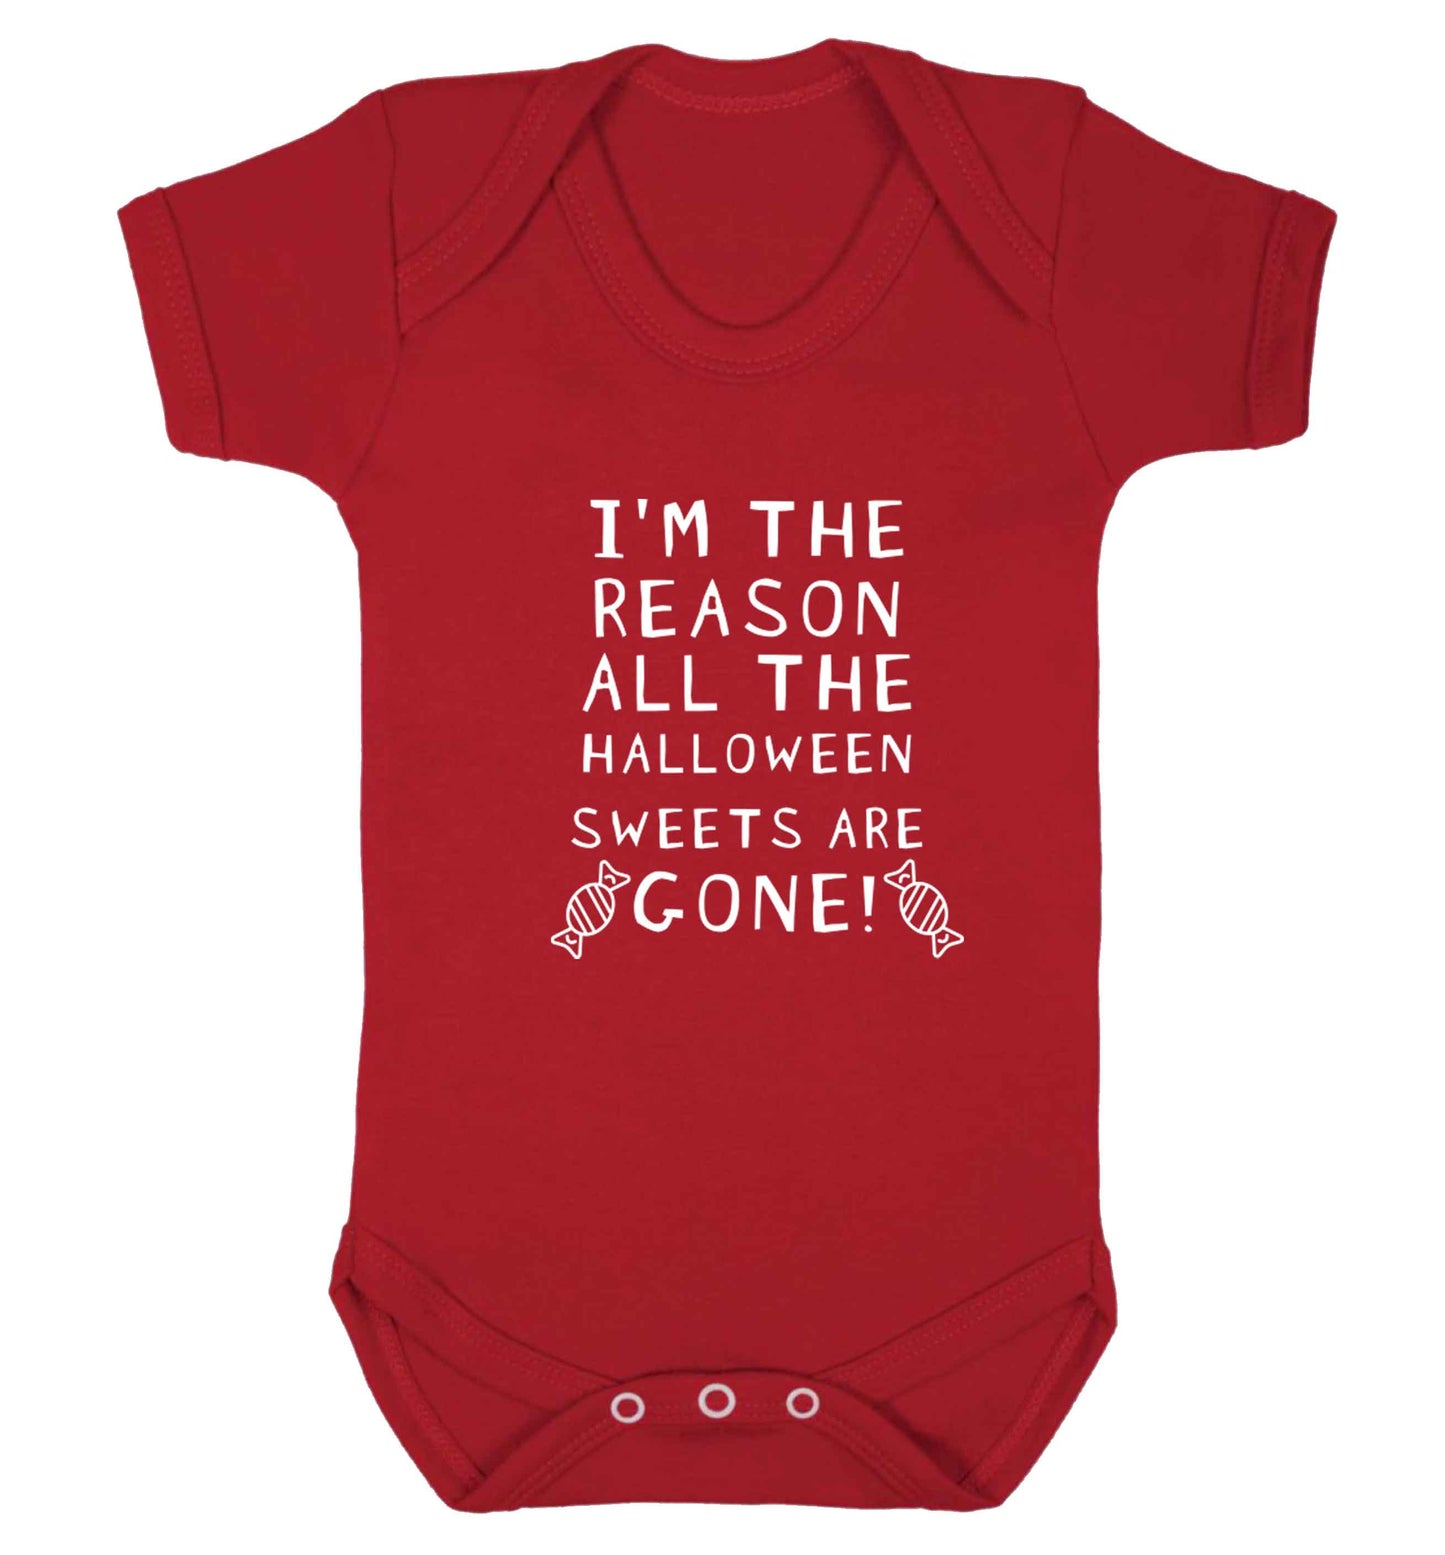 I'm the reason all of the halloween sweets are gone baby vest red 18-24 months